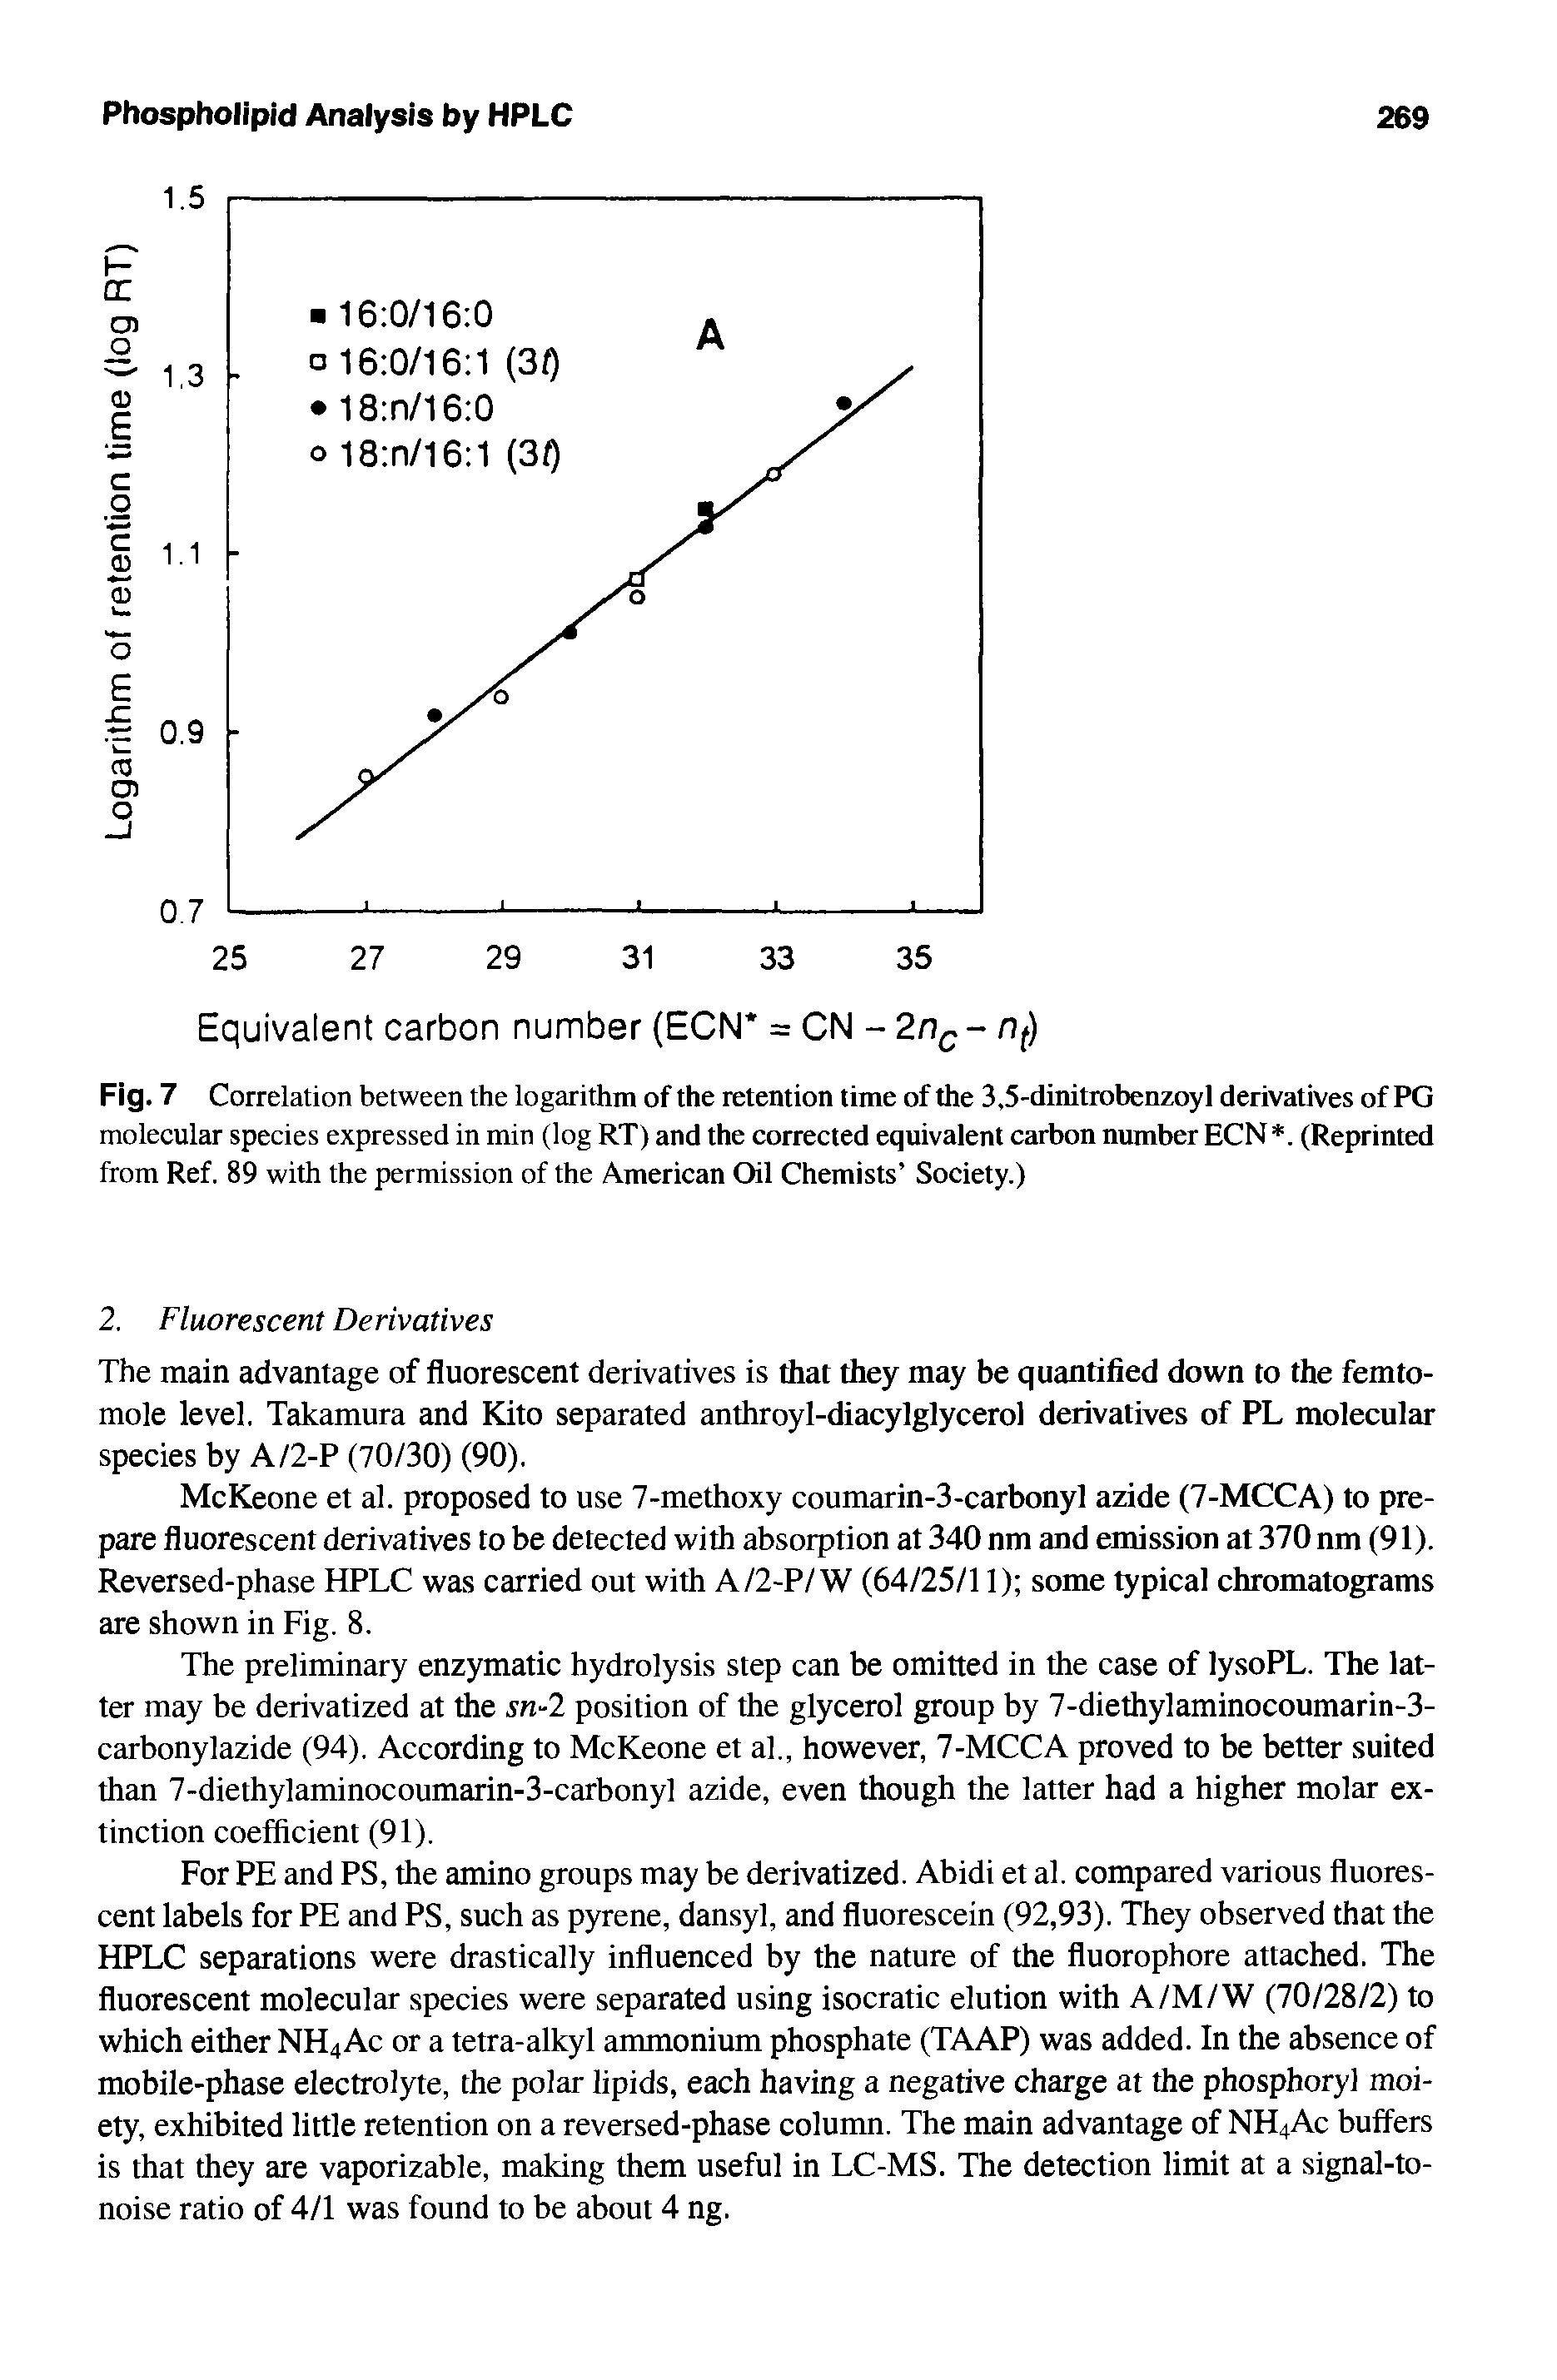 Fig. 7 Correlation between the logarithm of the retention time of the 3,5-dinitrobenzoyl derivatives of PG molecular species expressed in min (log RT) and the corrected equivalent carbon number ECN. (Reprinted from Ref. 89 with the permission of the American Oil Chemists Society.)...